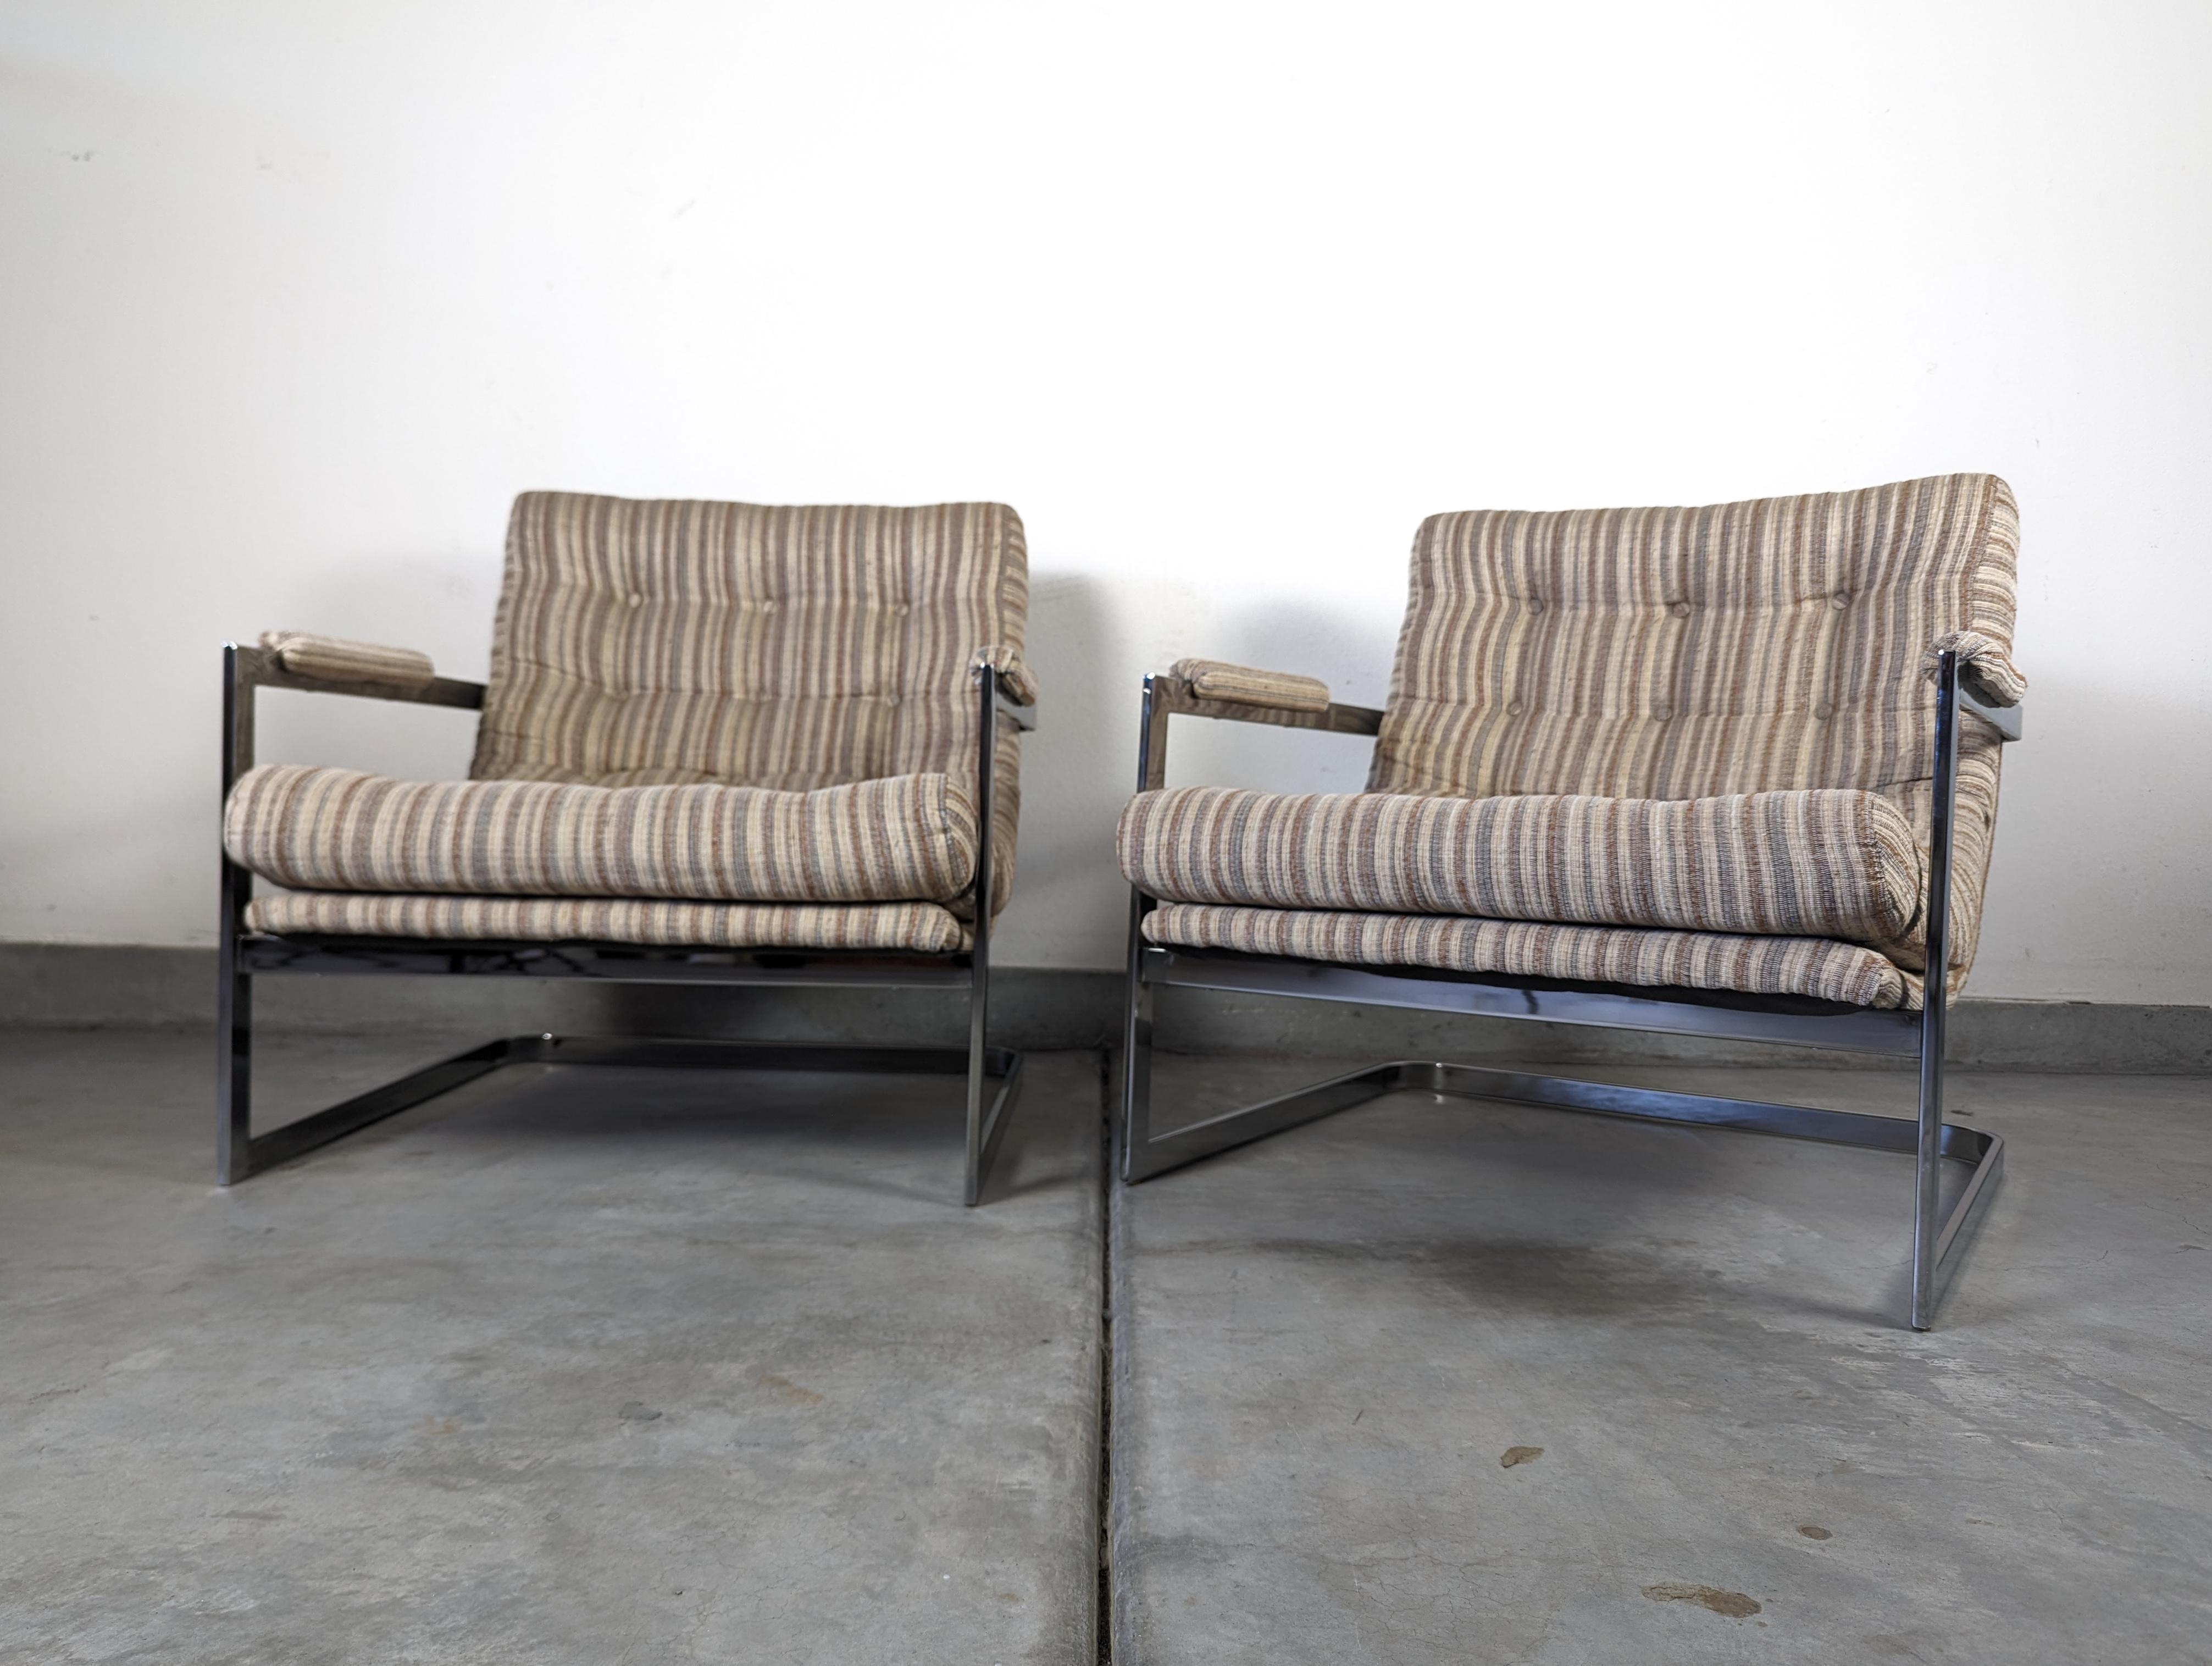 Pair of Mid Century Cantilevered Scoop Chairs - Style of Milo Baughman, c1970s 8